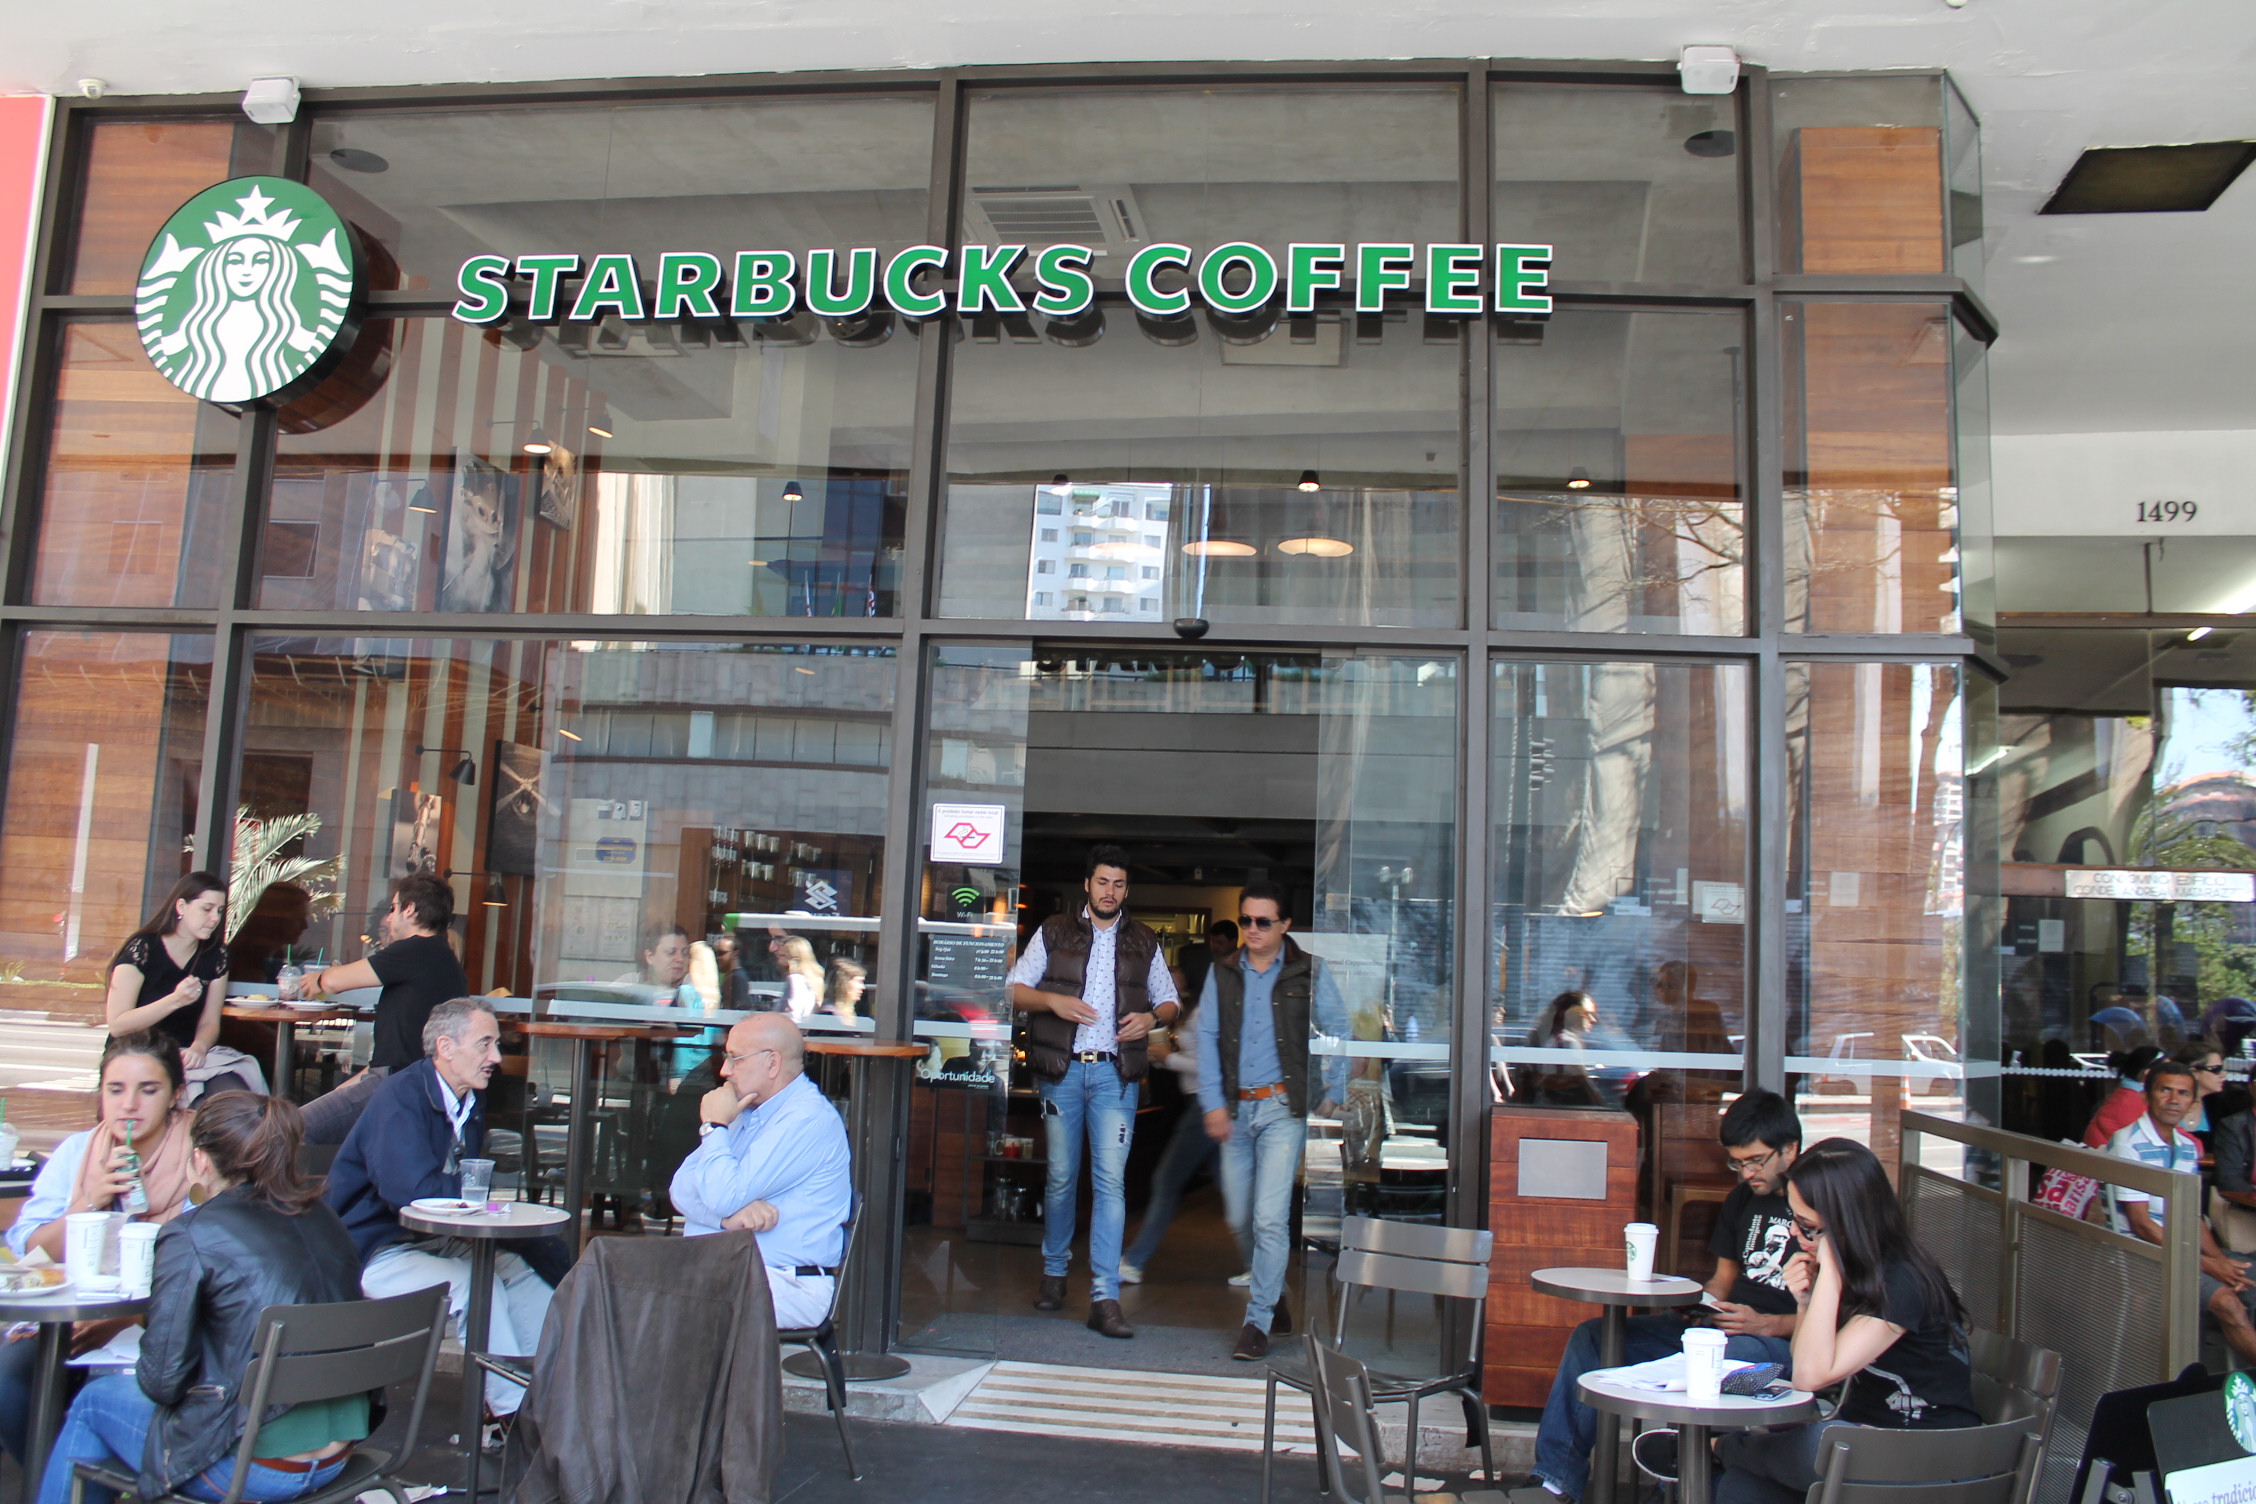 people are eating at a starbucks coffee shop